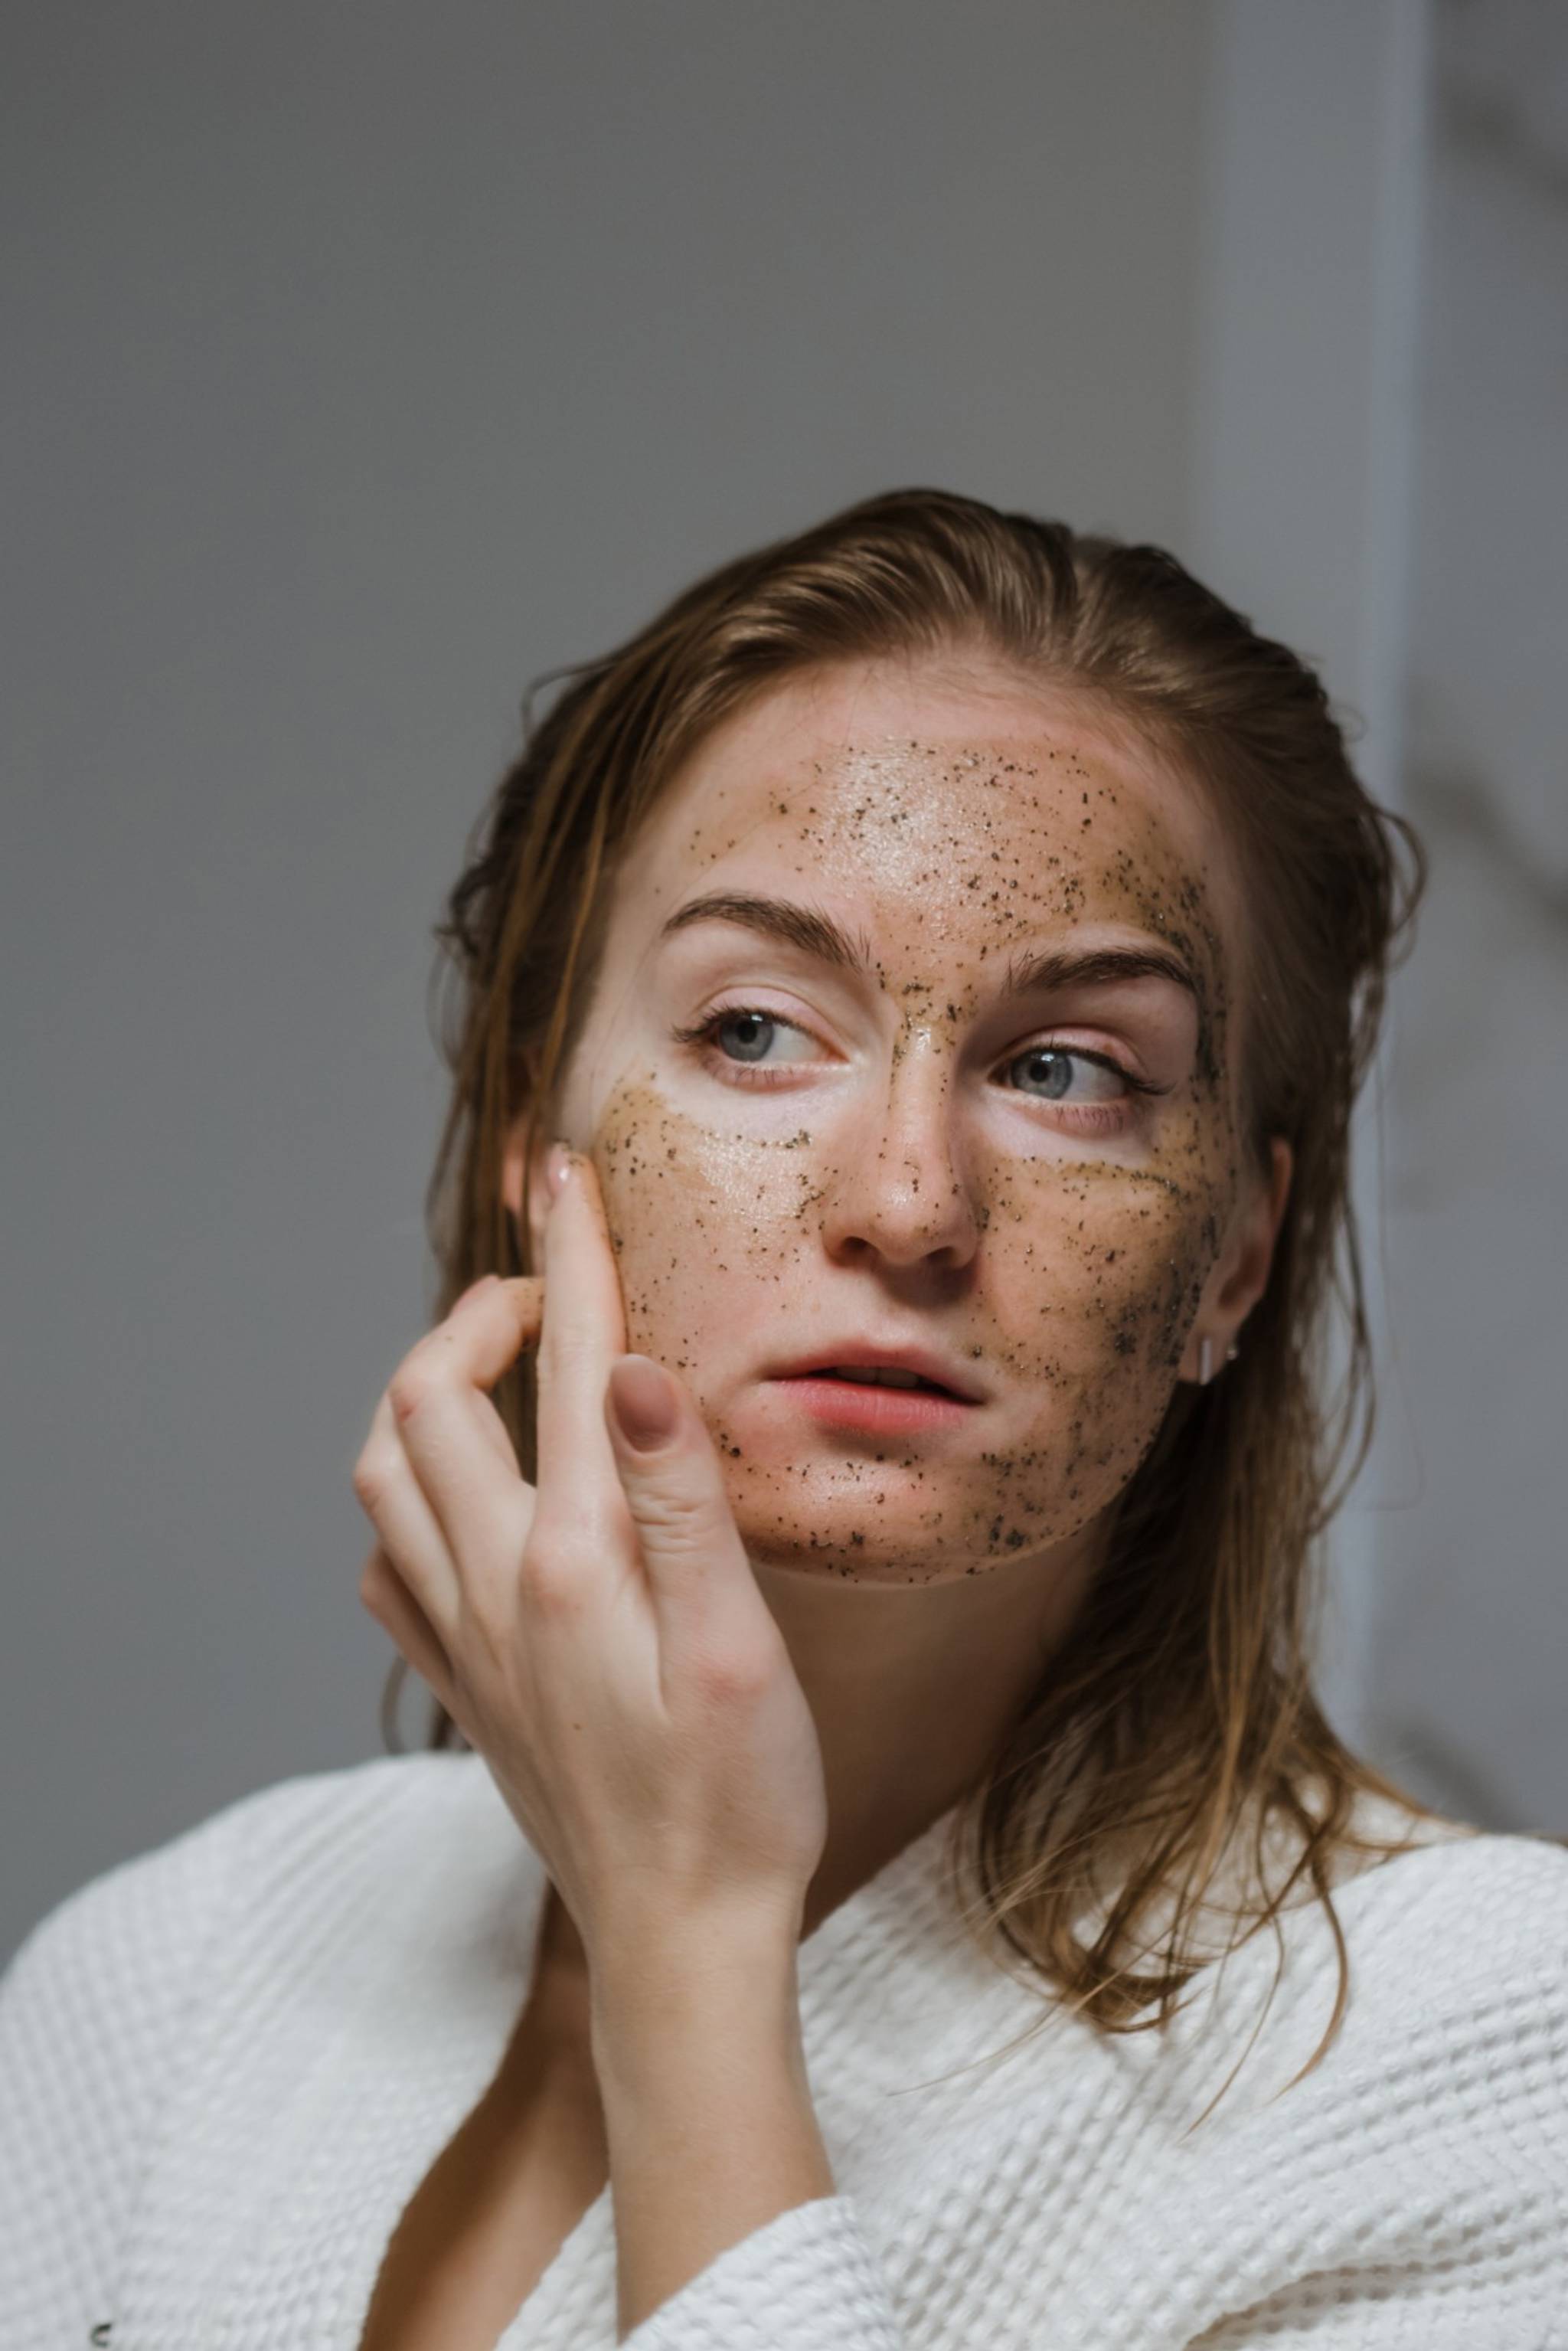 People want transparency from clean beauty